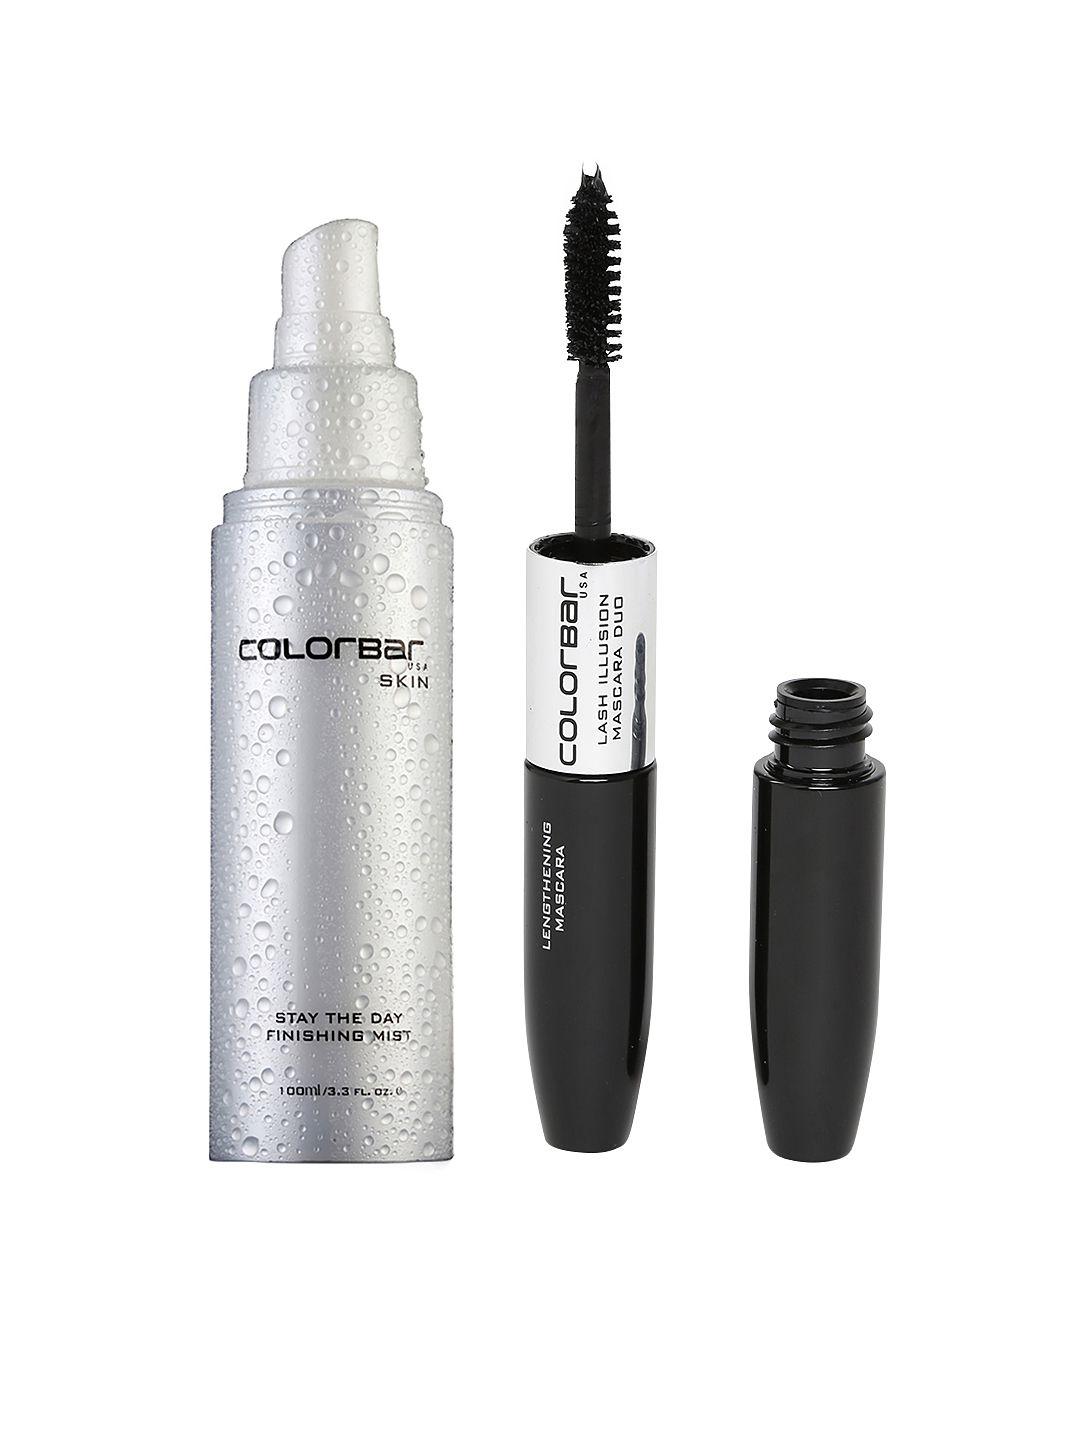 colorbar set of stay the day finishing mist & lash illusion mascara duo